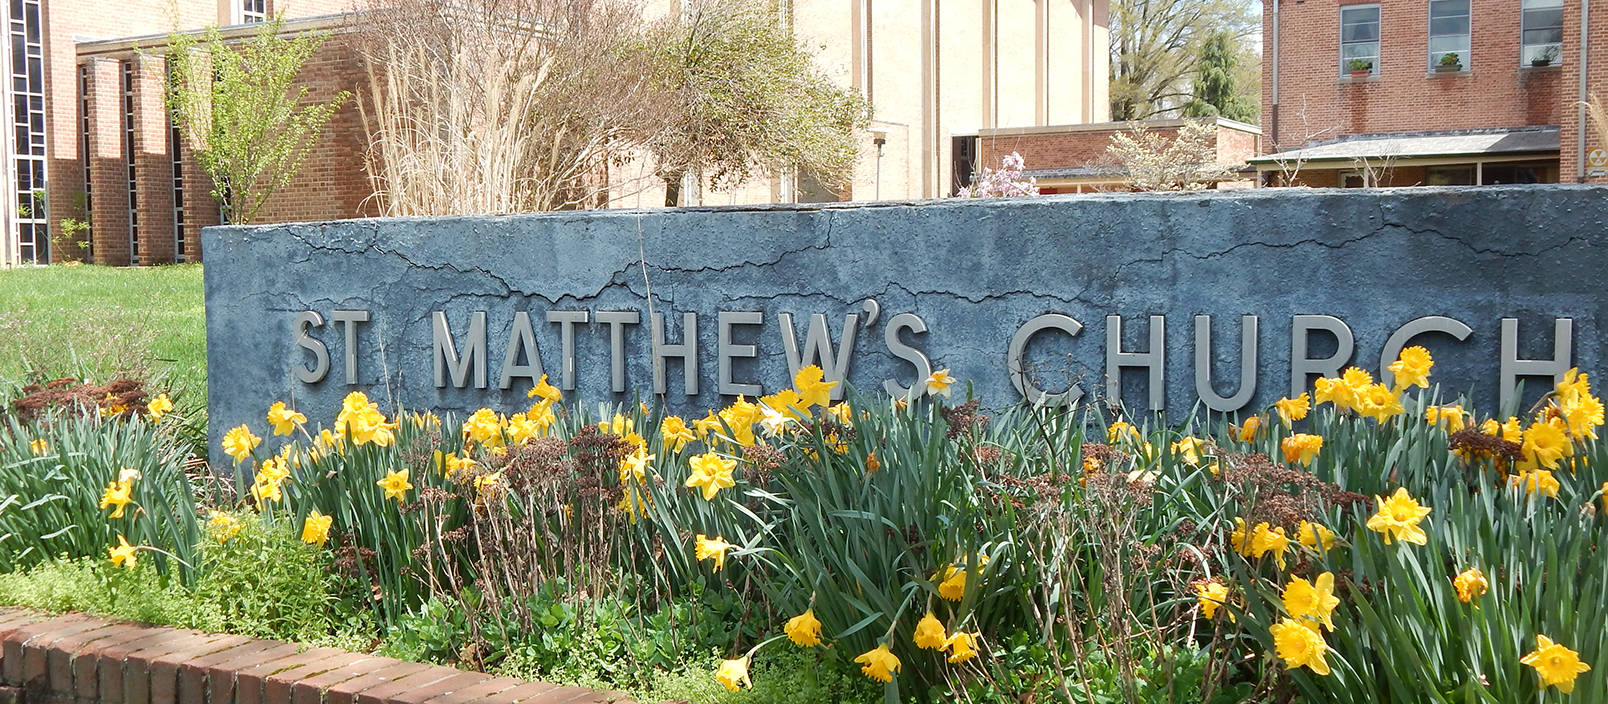 a sign that says st mathew's church surrounded by flowers